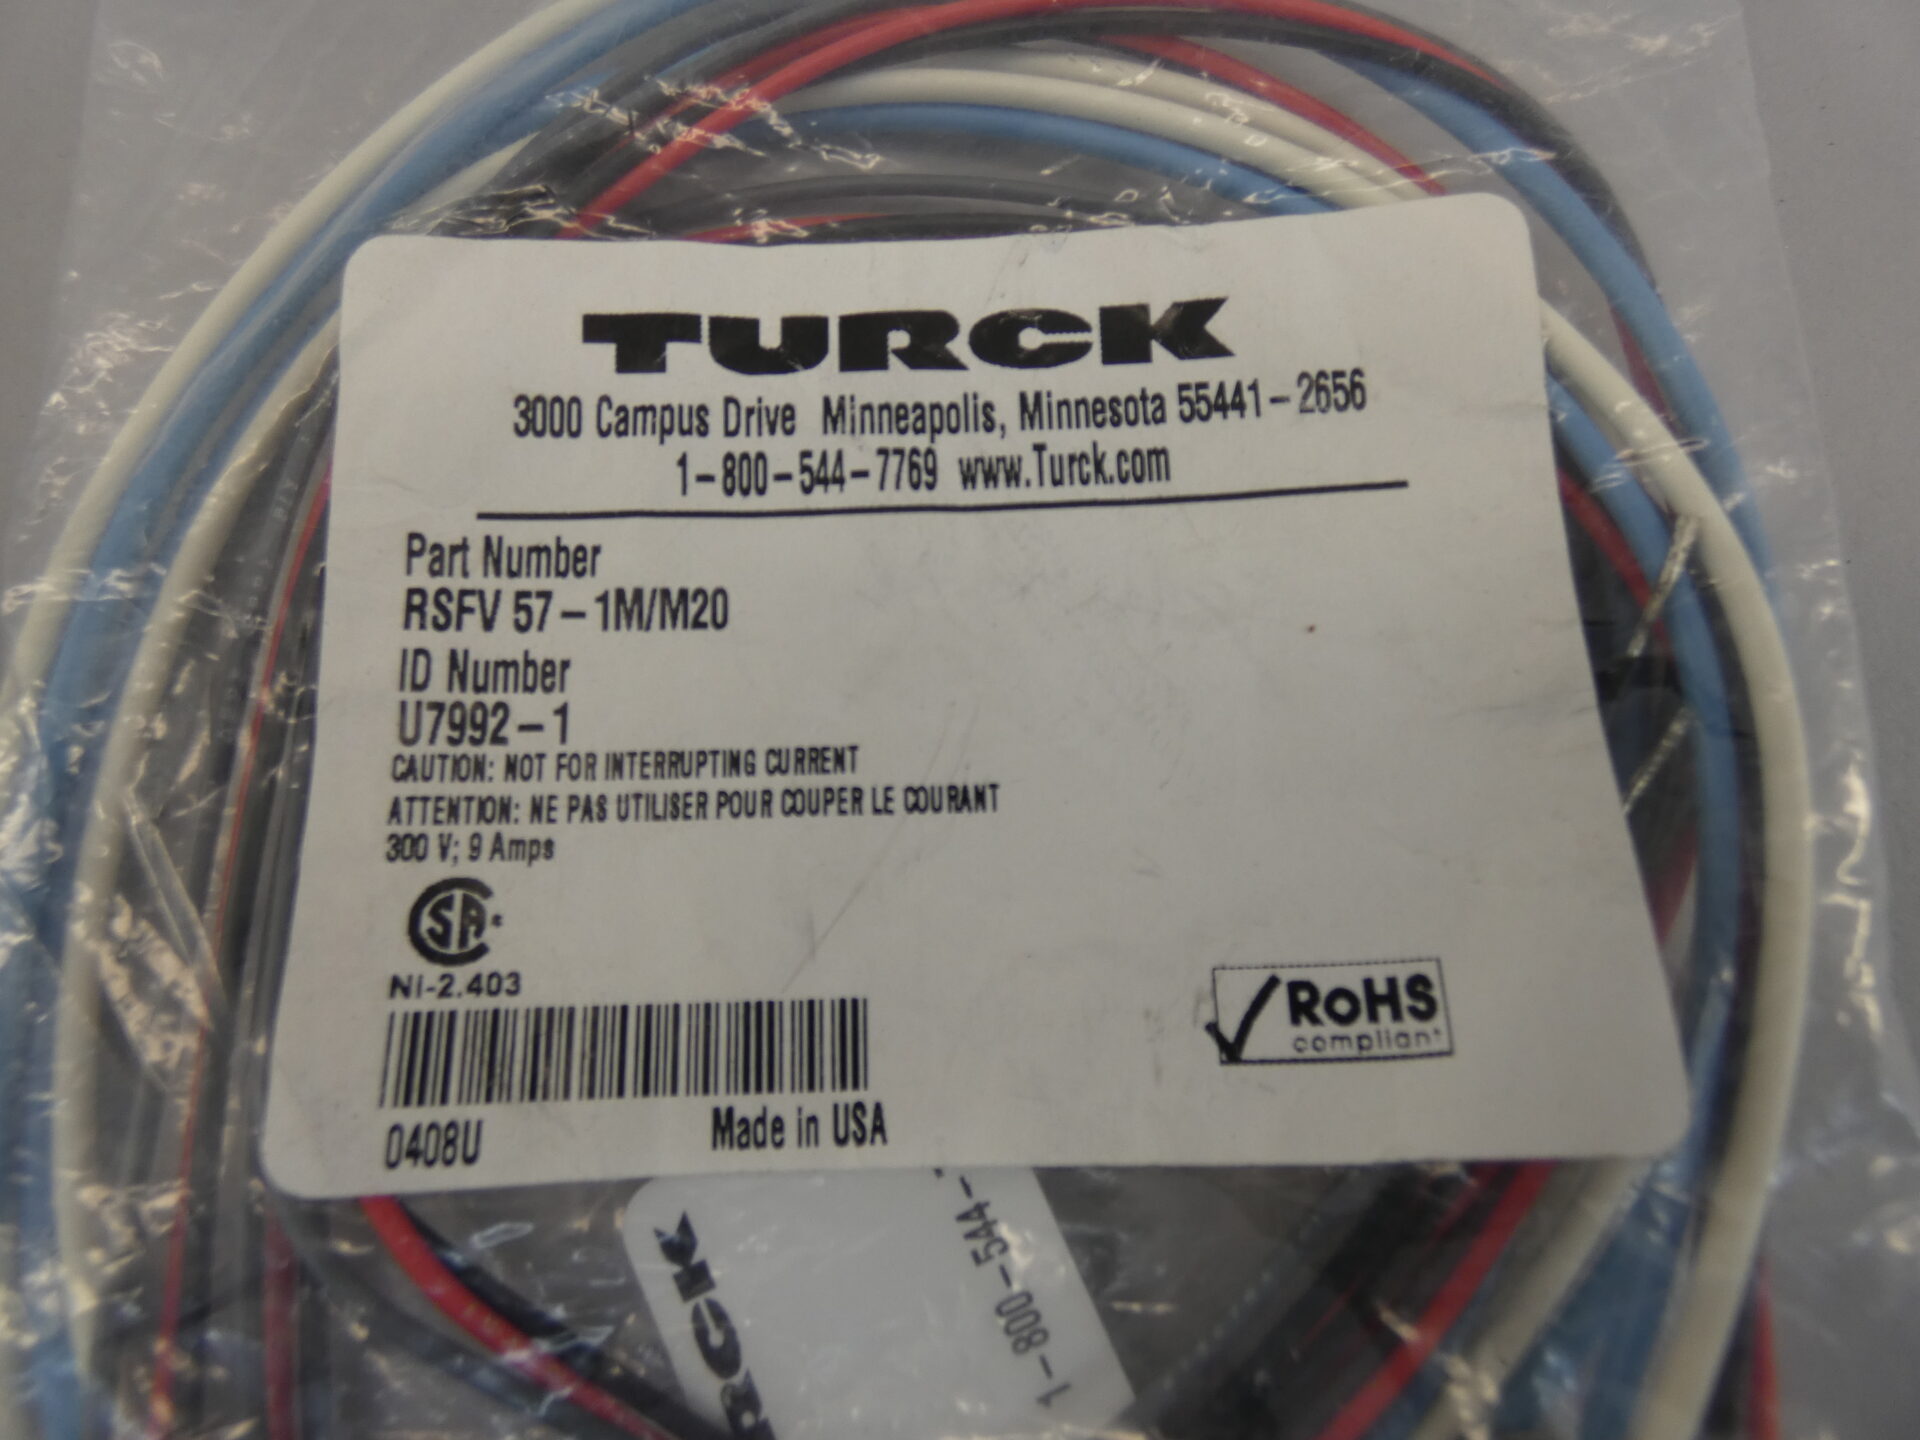 SINGLE ENDED MALE RECEPTABLE,U-44690 Details about  / TURCK RSF 56-4M//14.5//NPT//CS11894 #272715